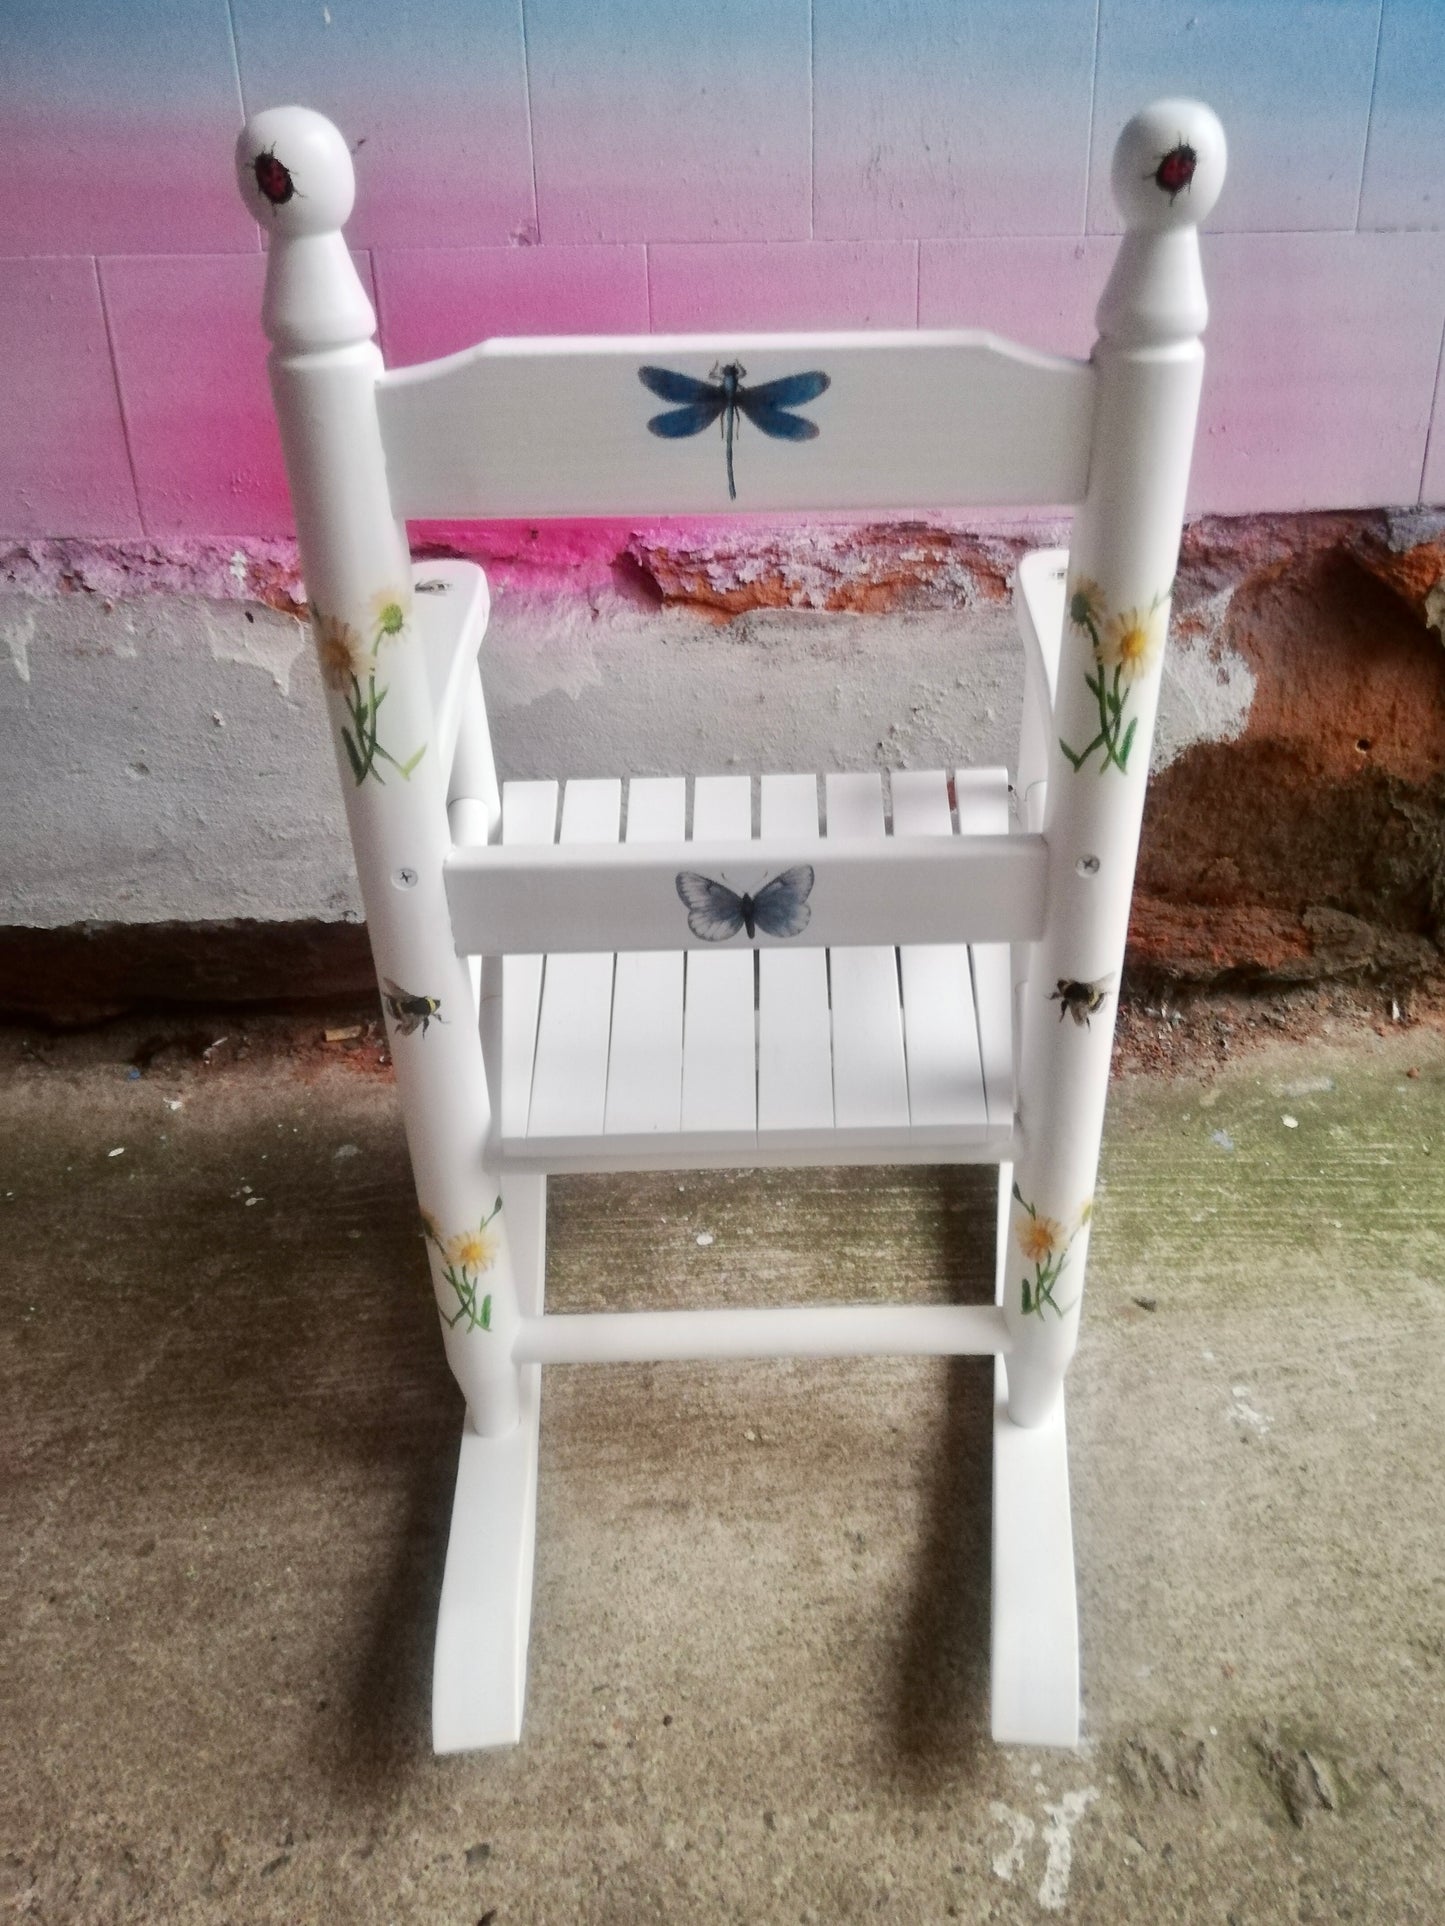 Personalised children's rocking chair - Dragonfly friends theme - made to order